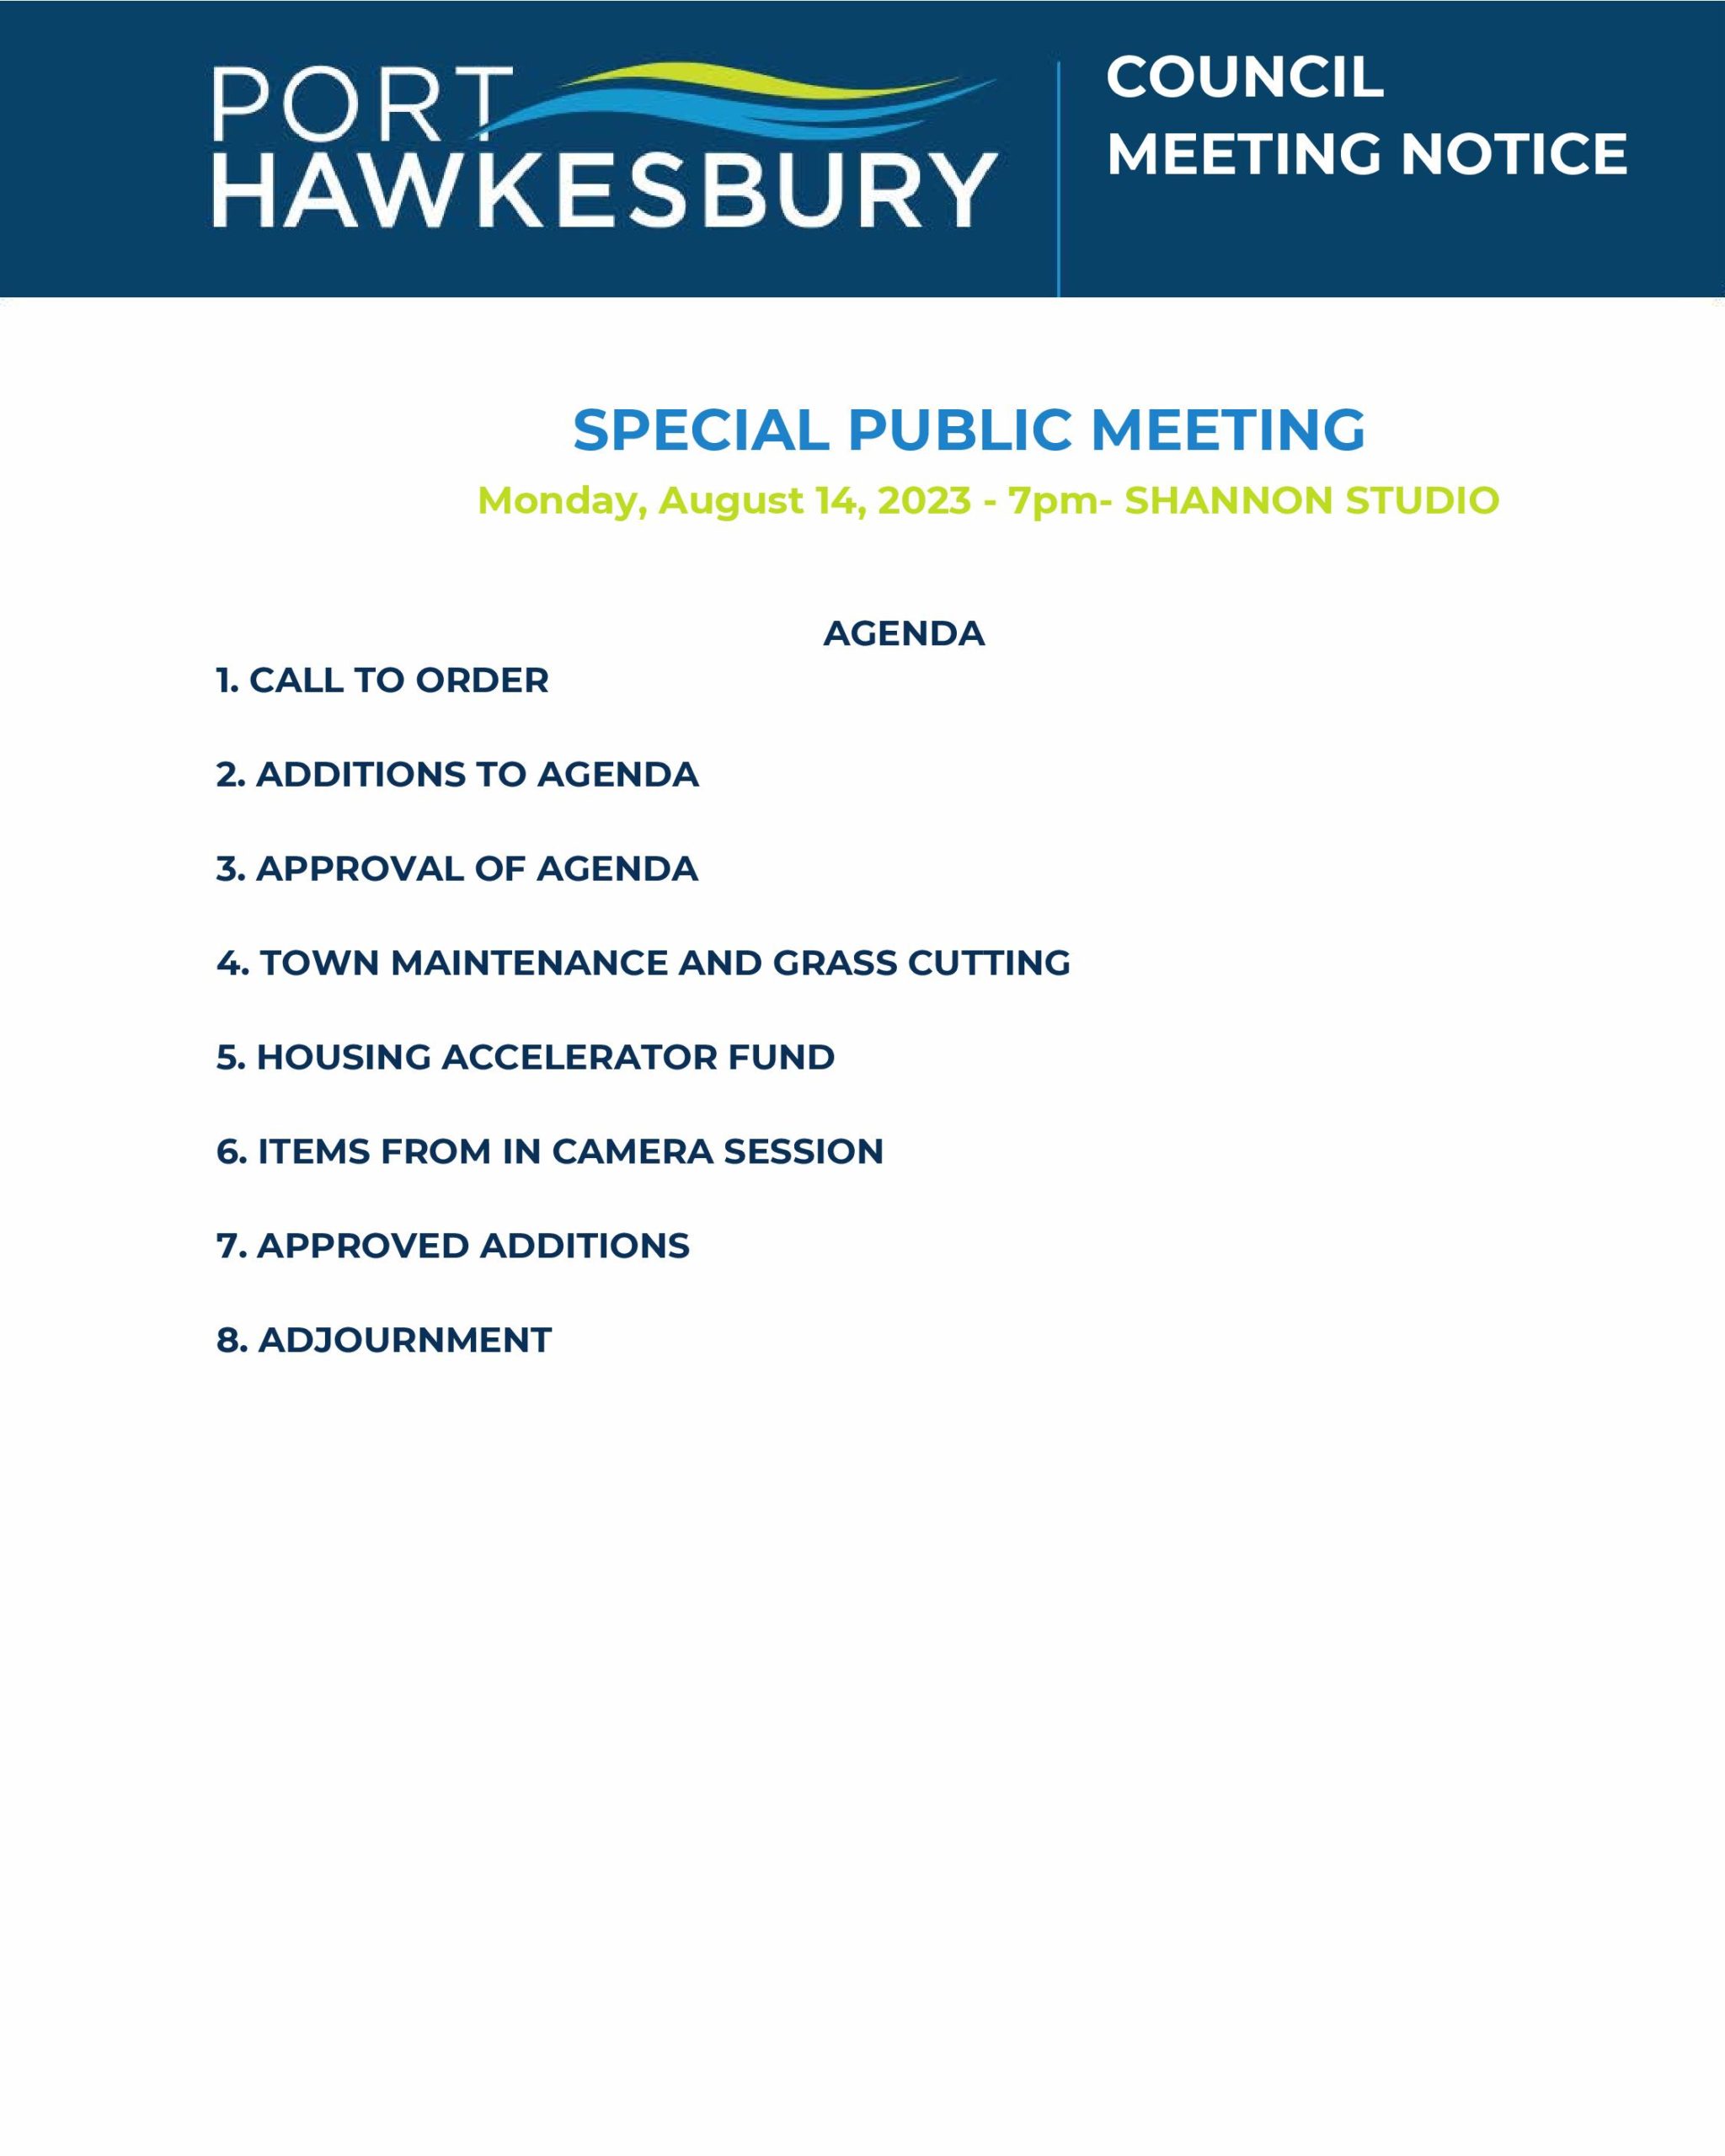 Special Public Meeting of Council Monday August 14 2023